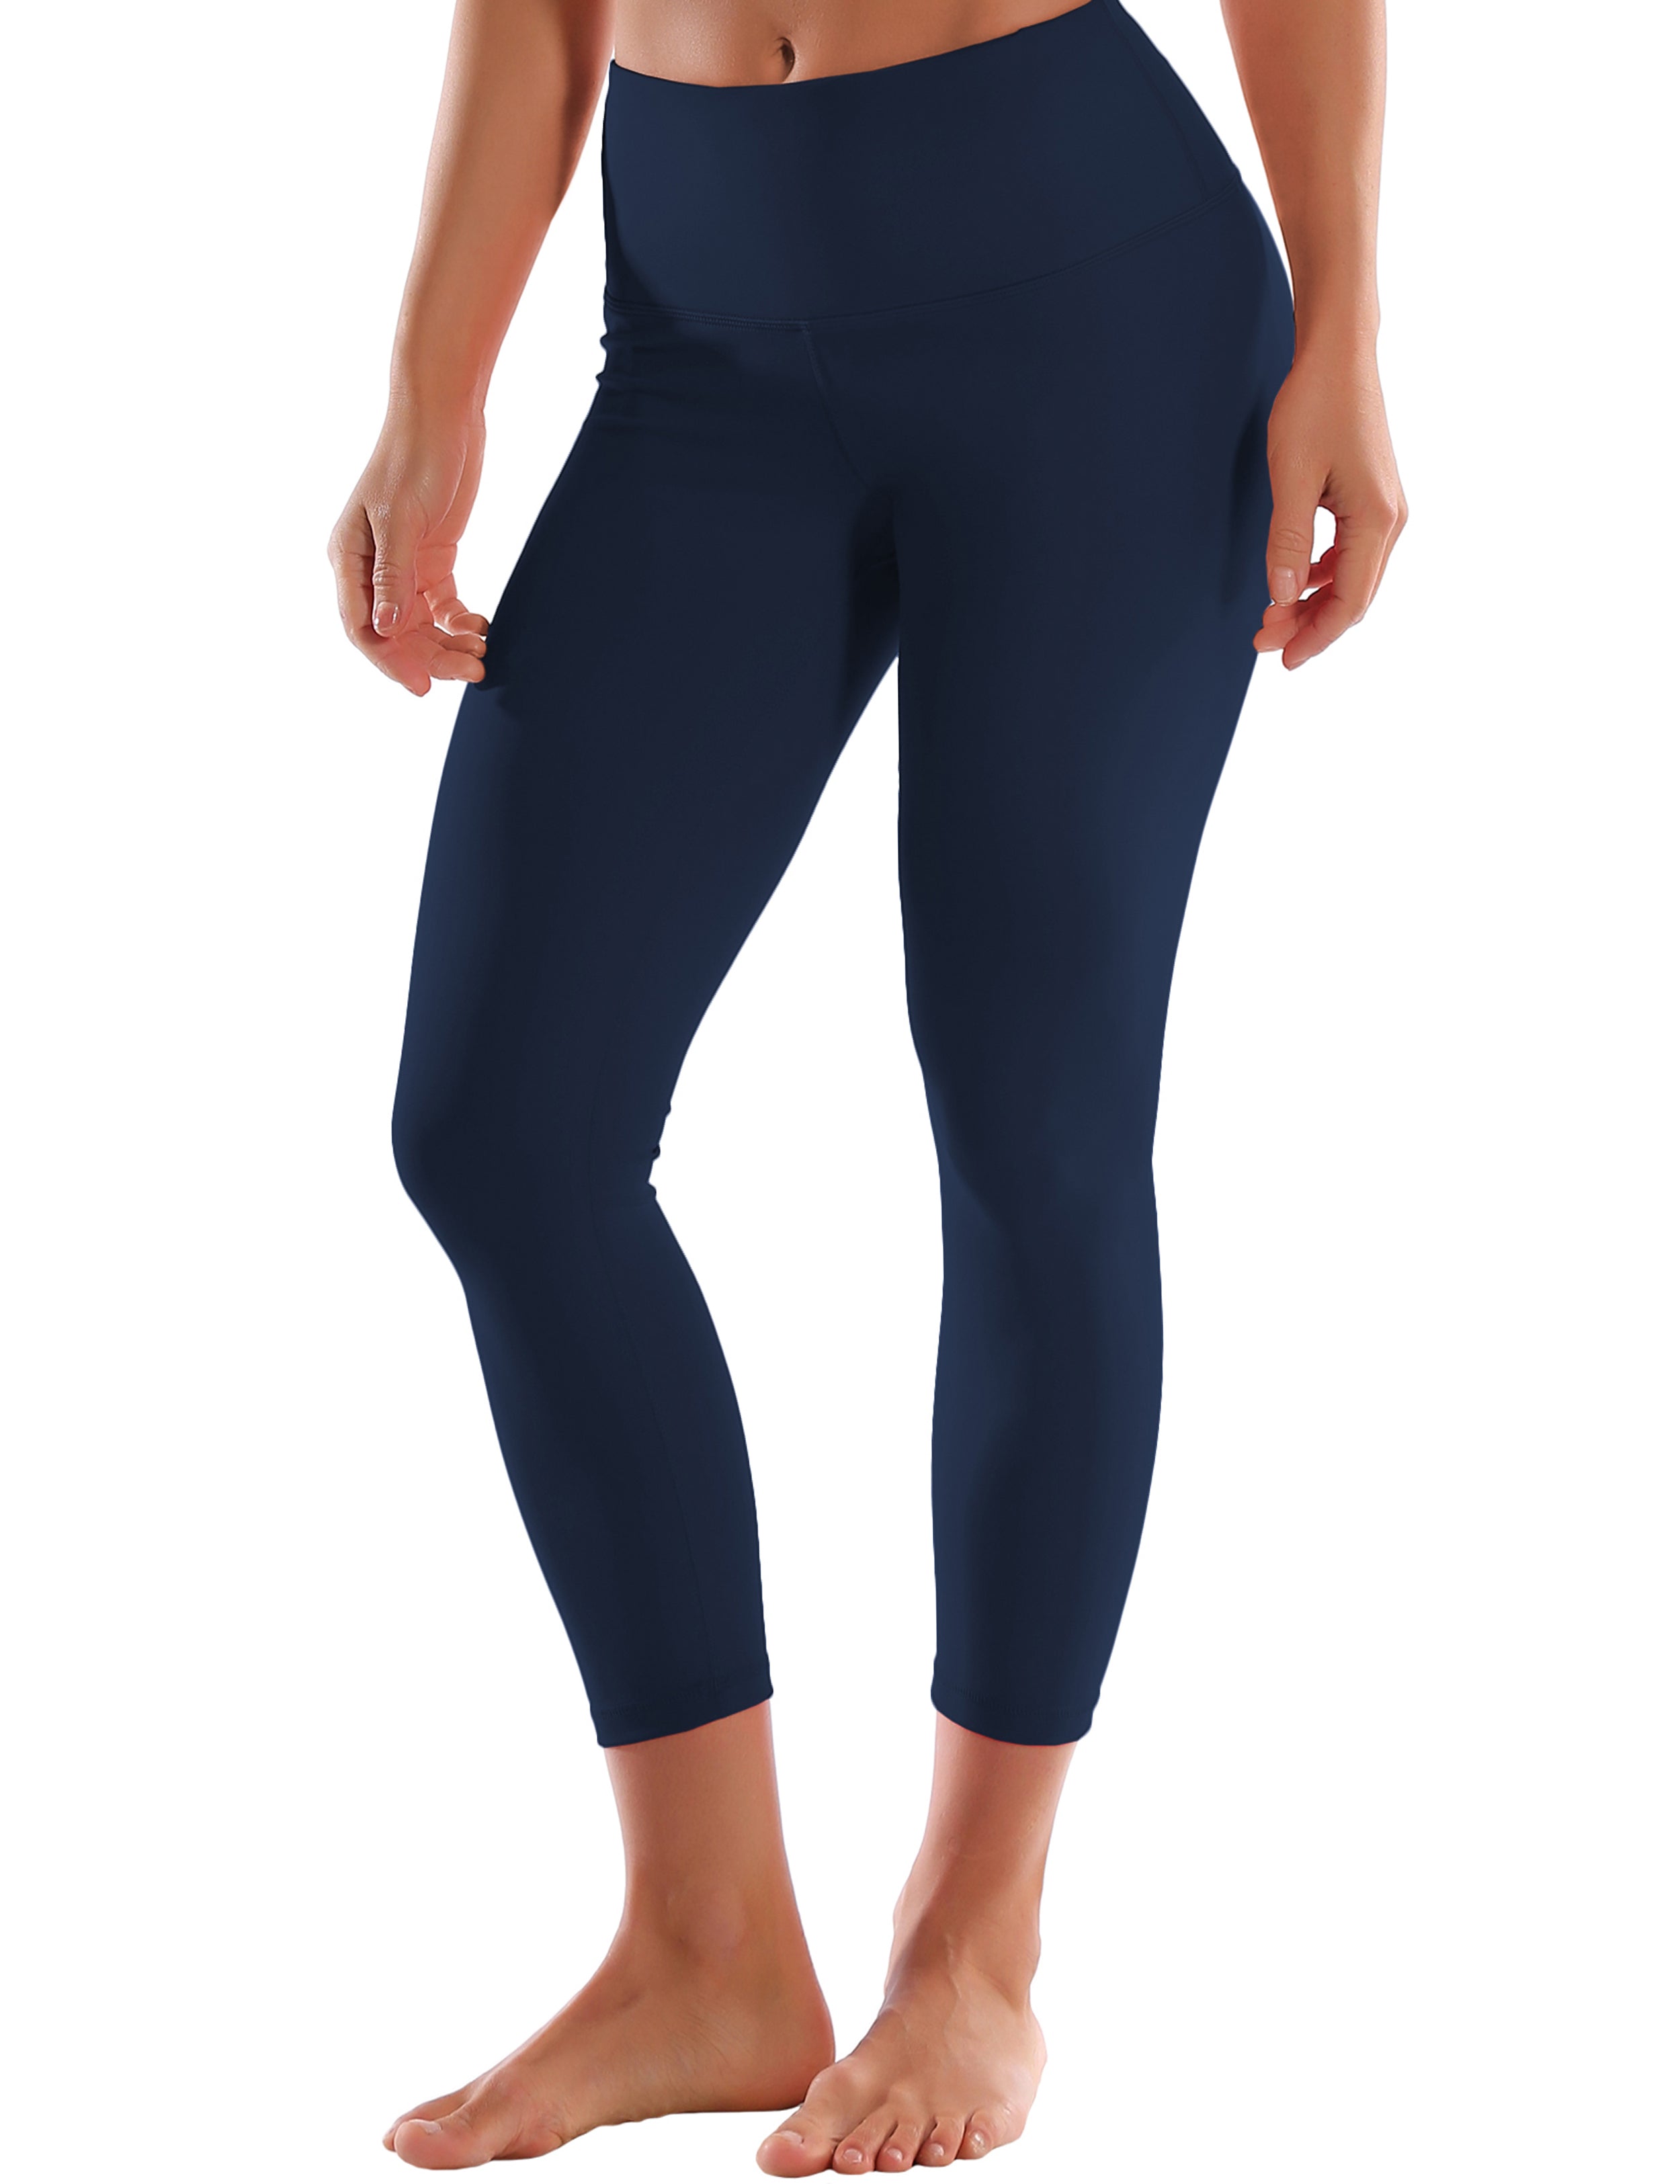 22" High Waist Crop Tight Capris darknavy 75%Nylon/25%Spandex Fabric doesn't attract lint easily 4-way stretch No see-through Moisture-wicking Tummy control Inner pocket